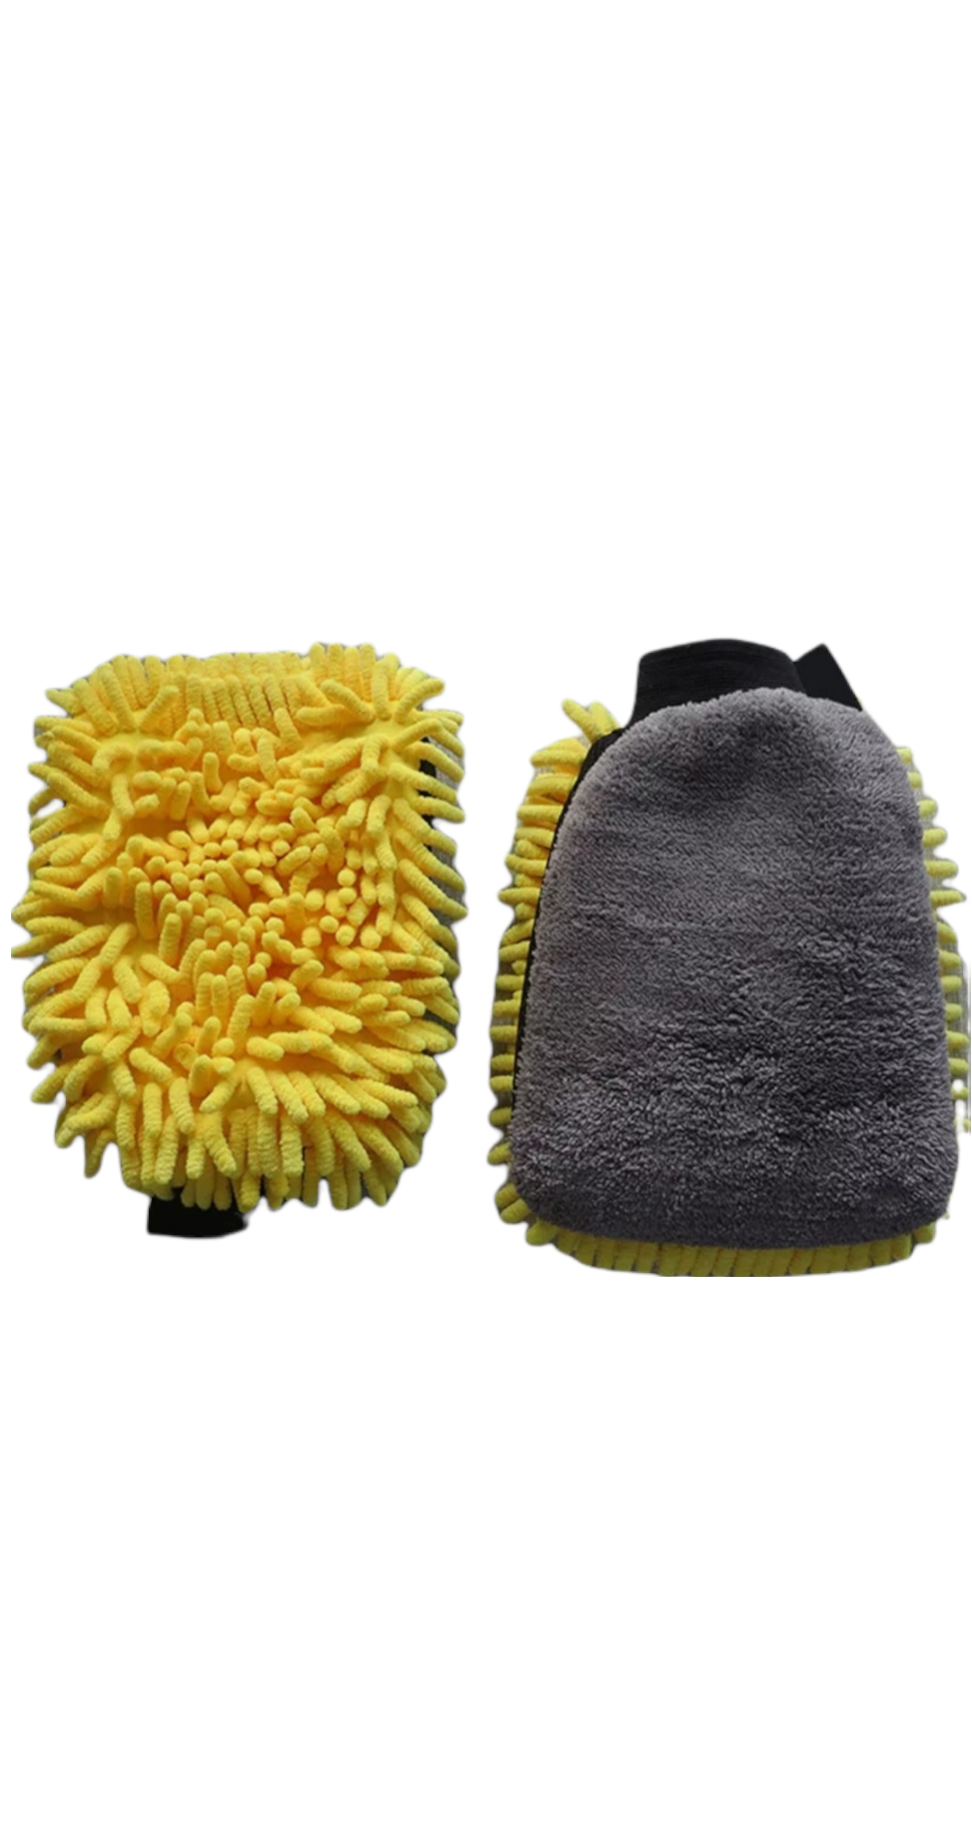 Mesh Bug Car Wash Sponge Chenille Cleaning Mitt Scratch-free for